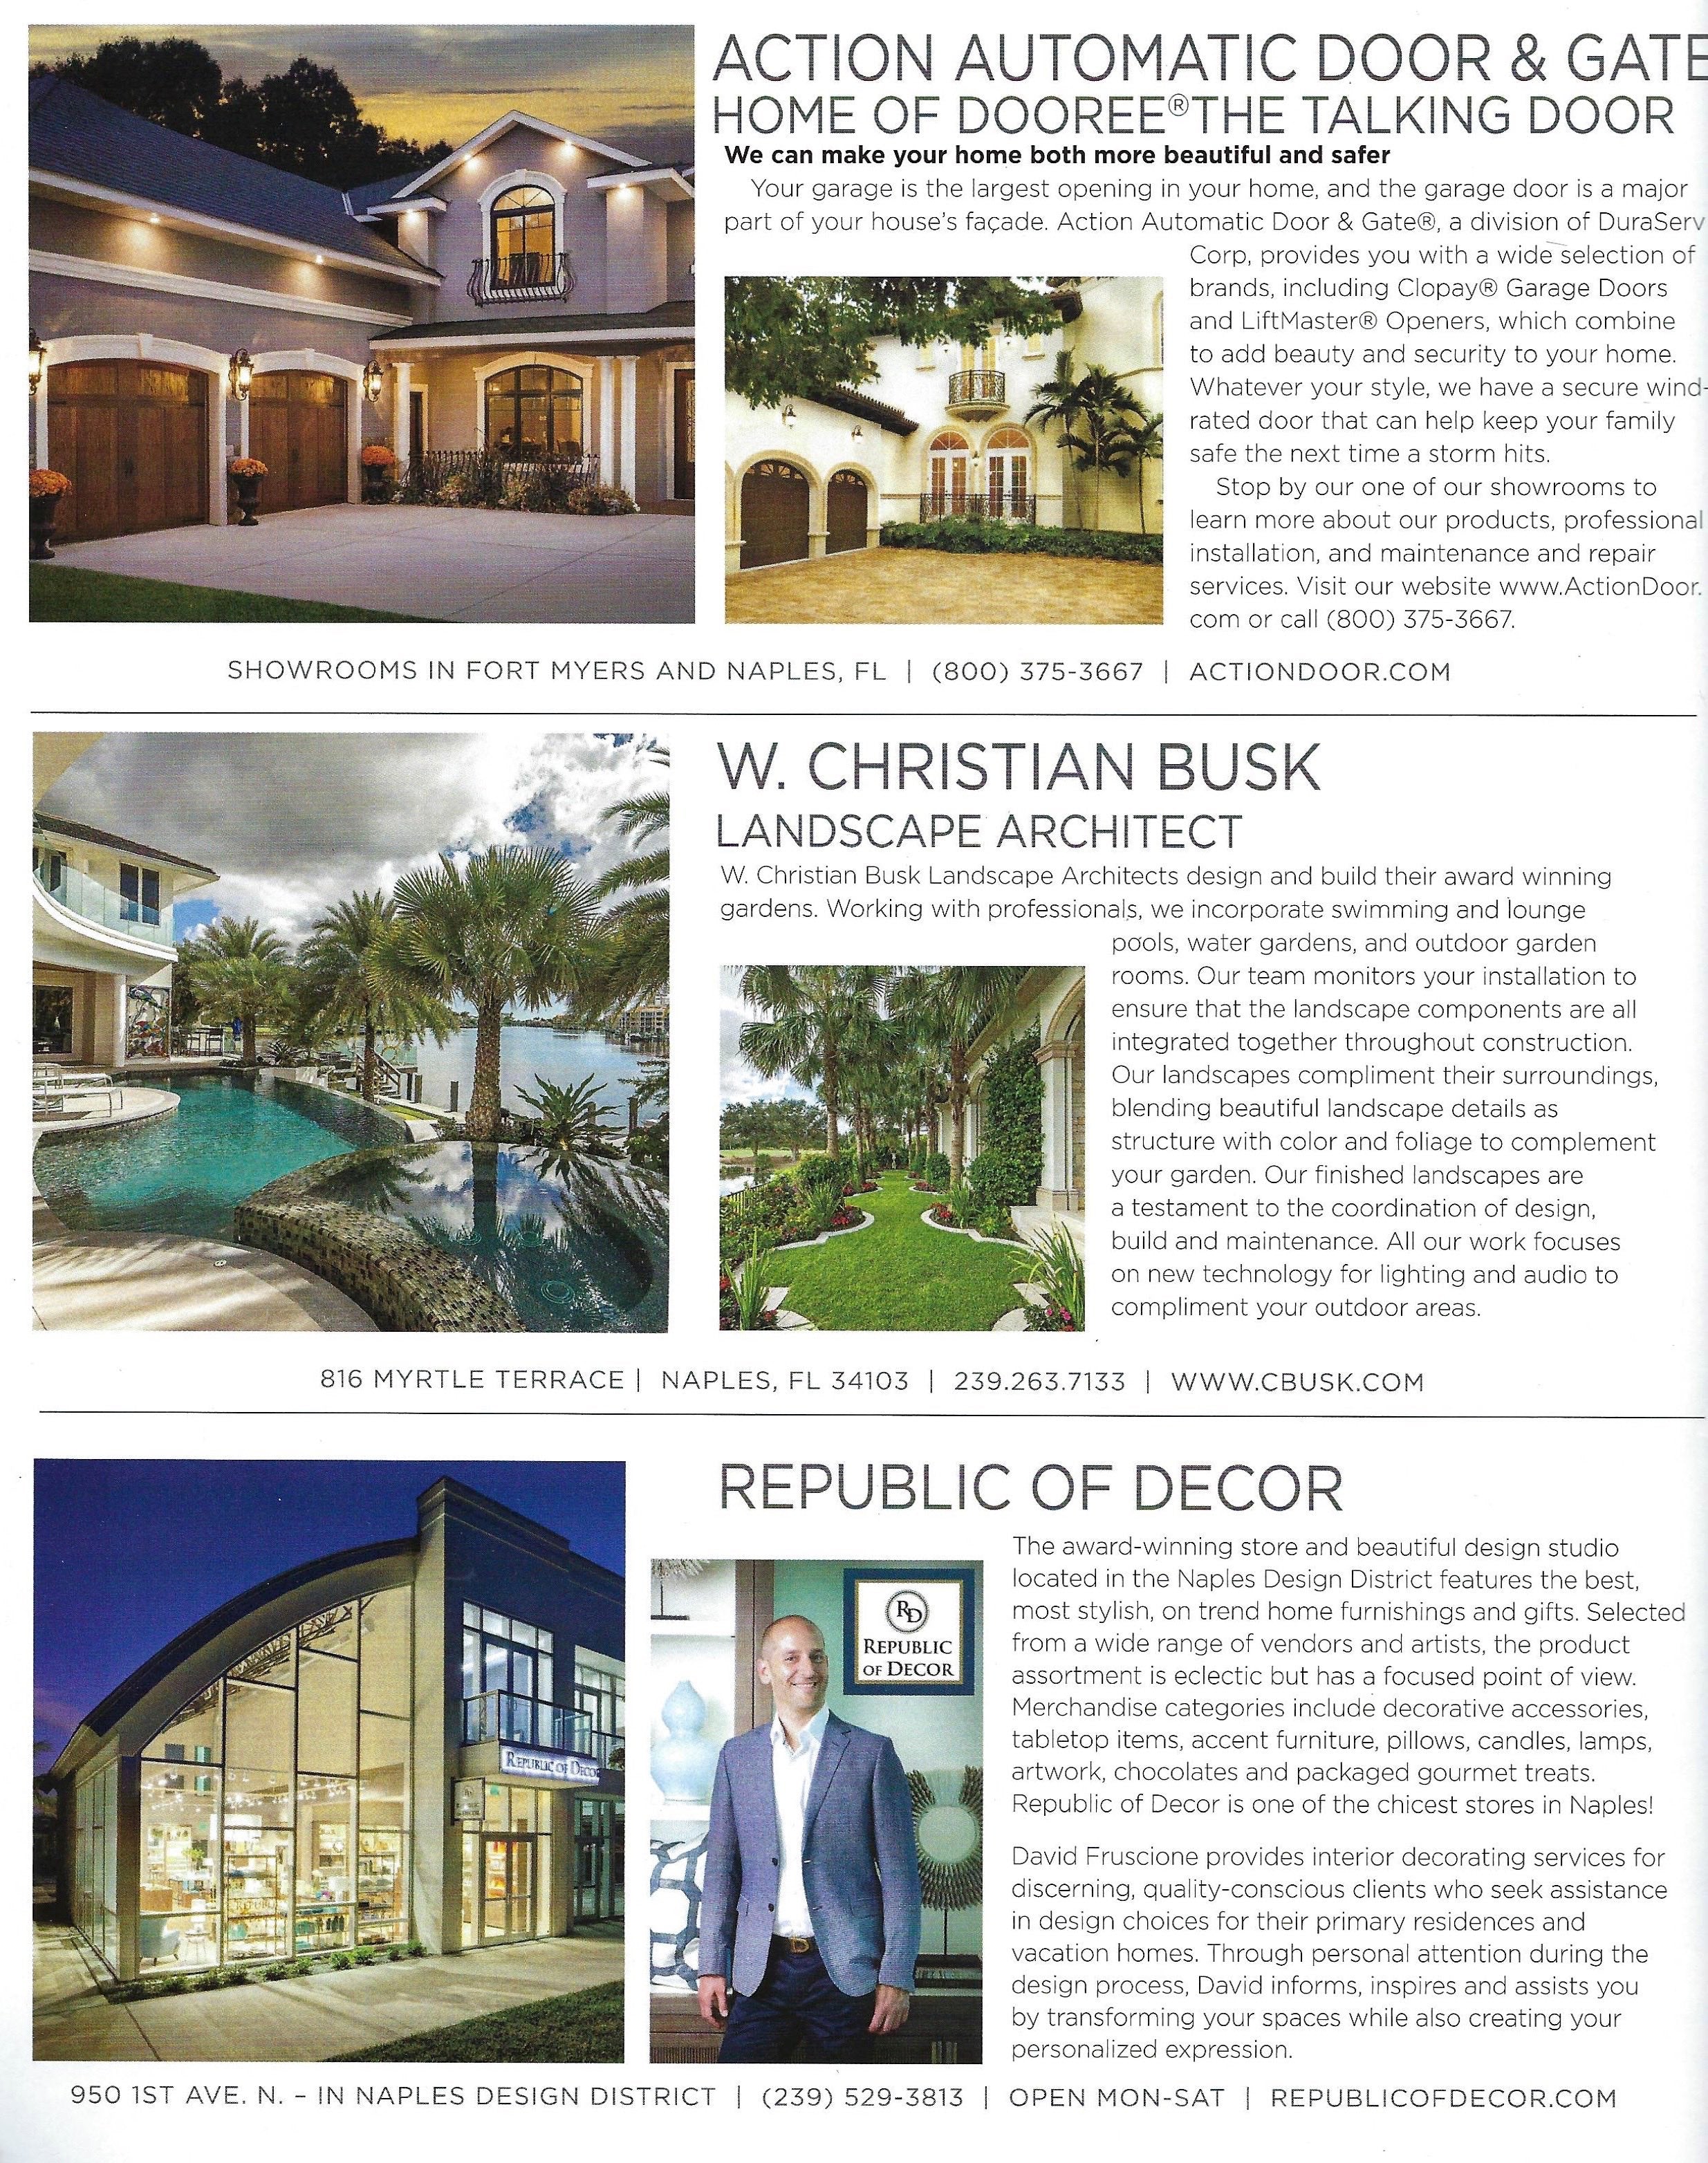 A feature on Republic of Decor in Naples, Florida, owner by award-winning interior designer David Fruscione